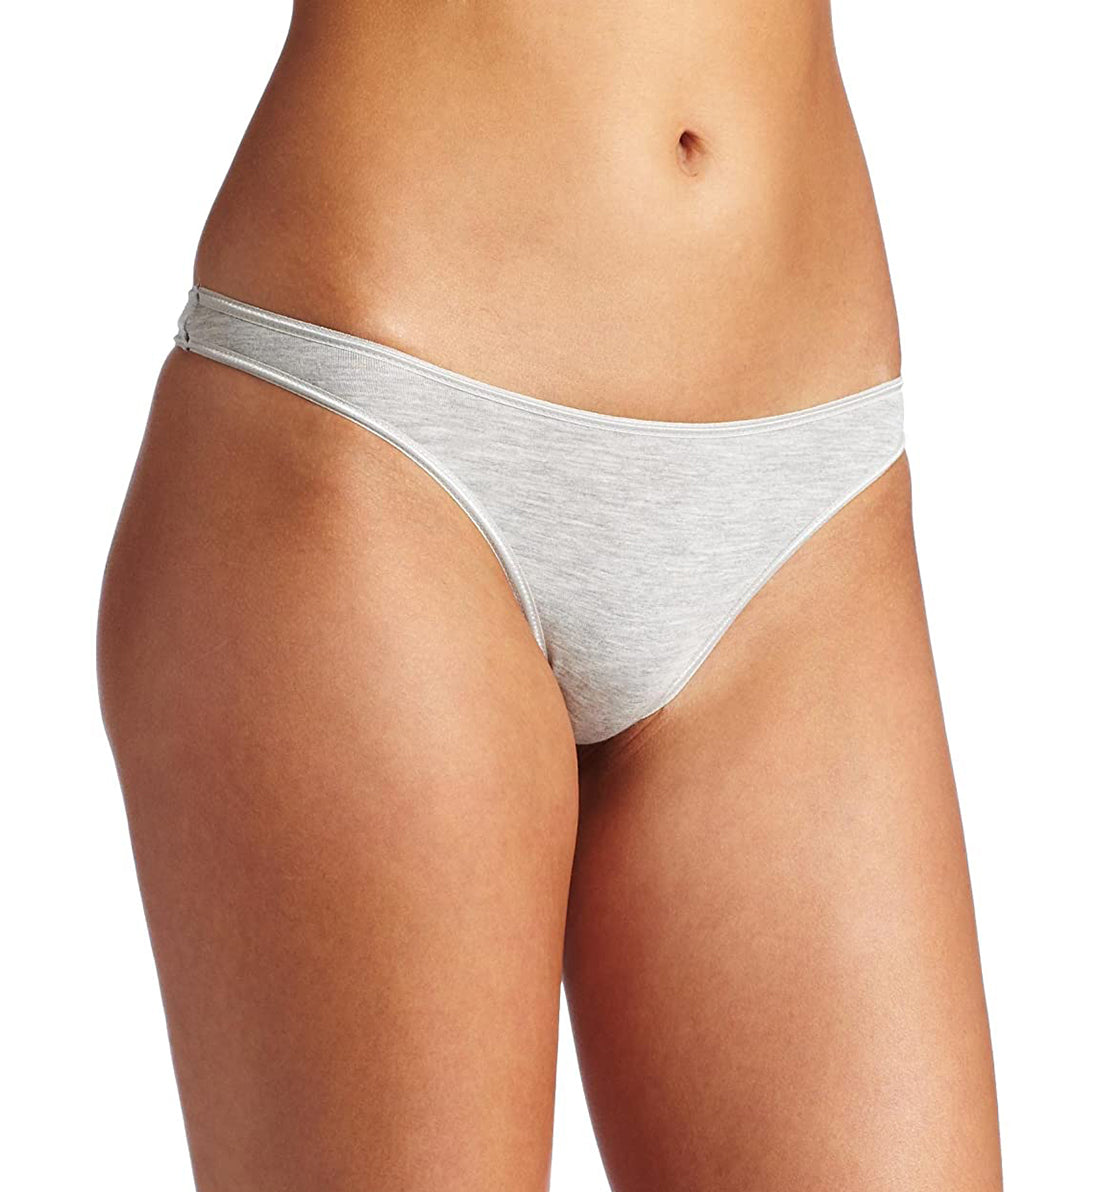 Cosabella Talco Low Rise Thong (TALCO0321),S/M,Heather Gray - Heather Gray,S/M